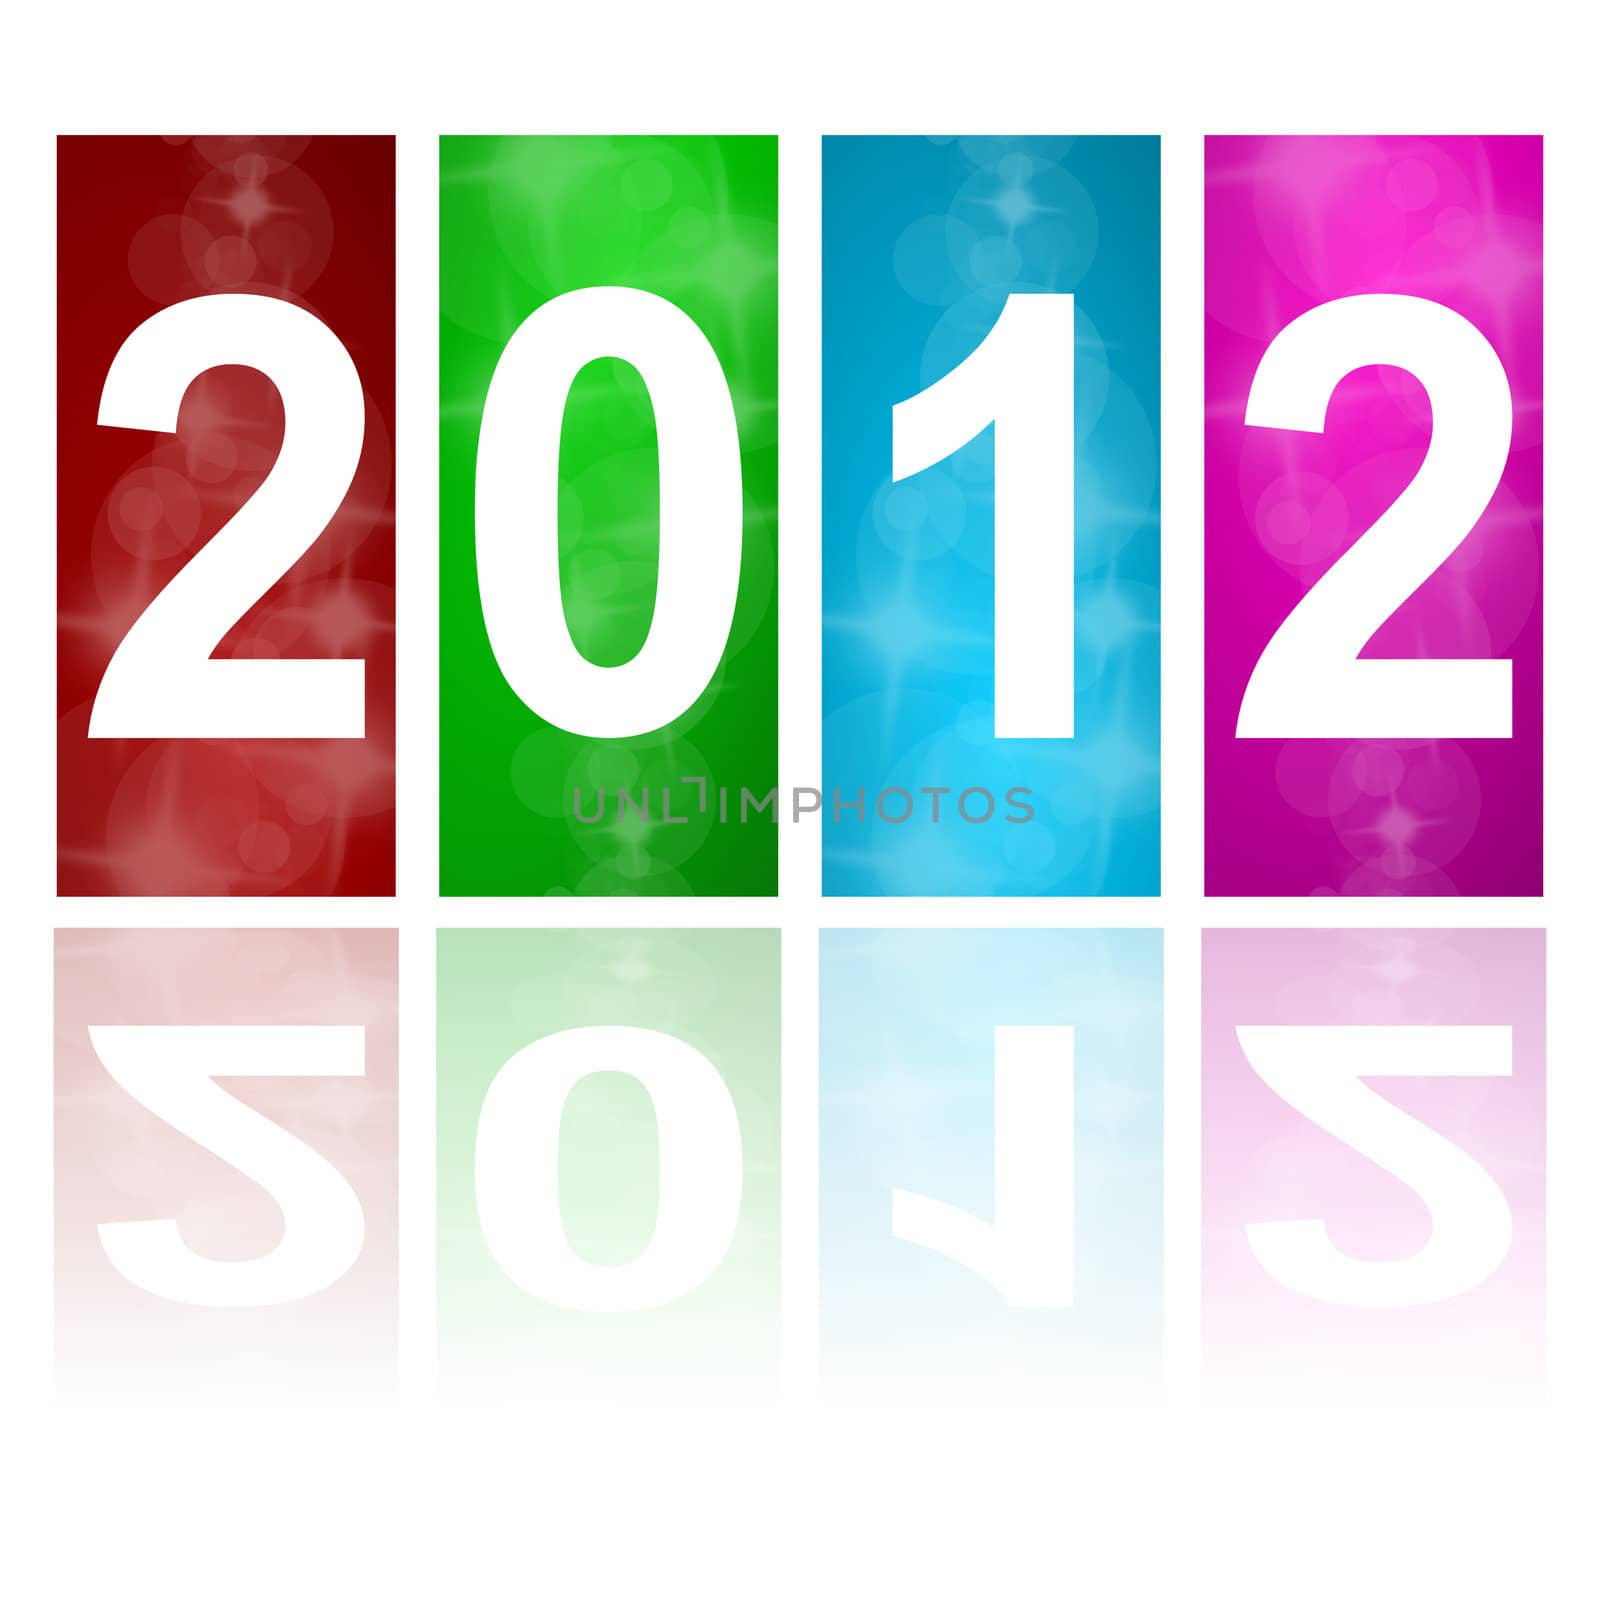 2012 new year abstract background by alexwhite